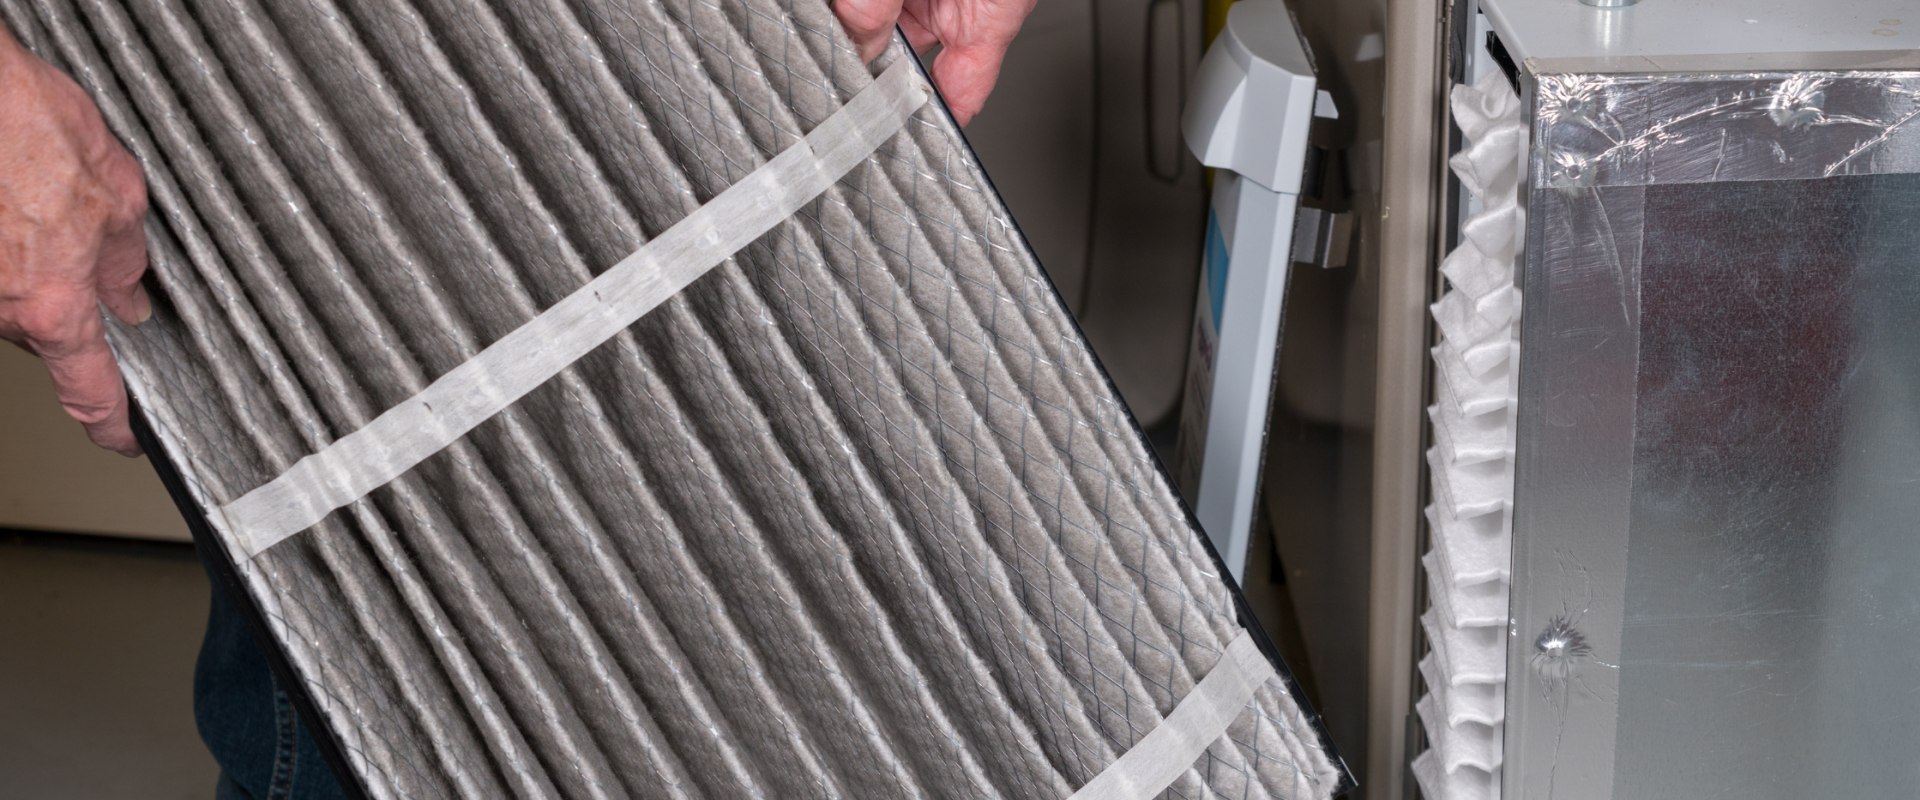 How to Easily Find the Right Size for Your Furnace Filter